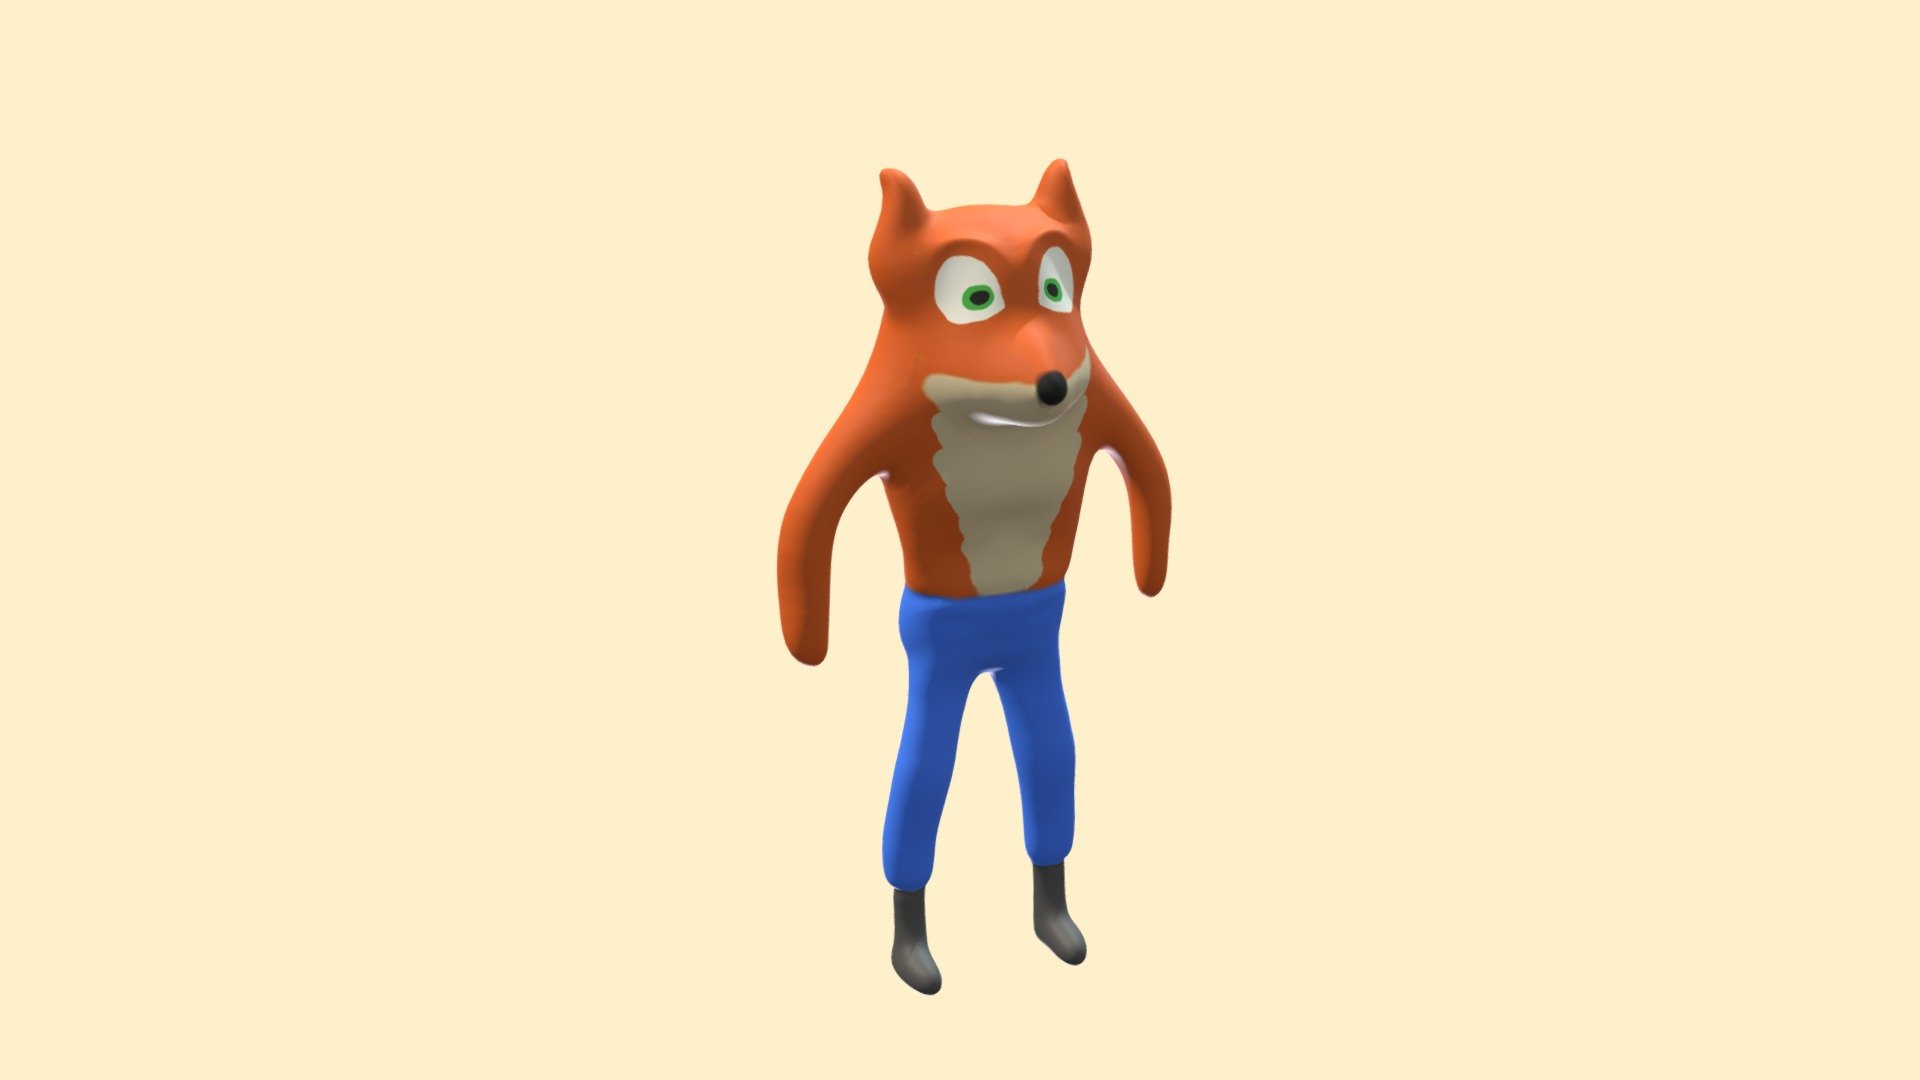 Weird Looking Fox with pants